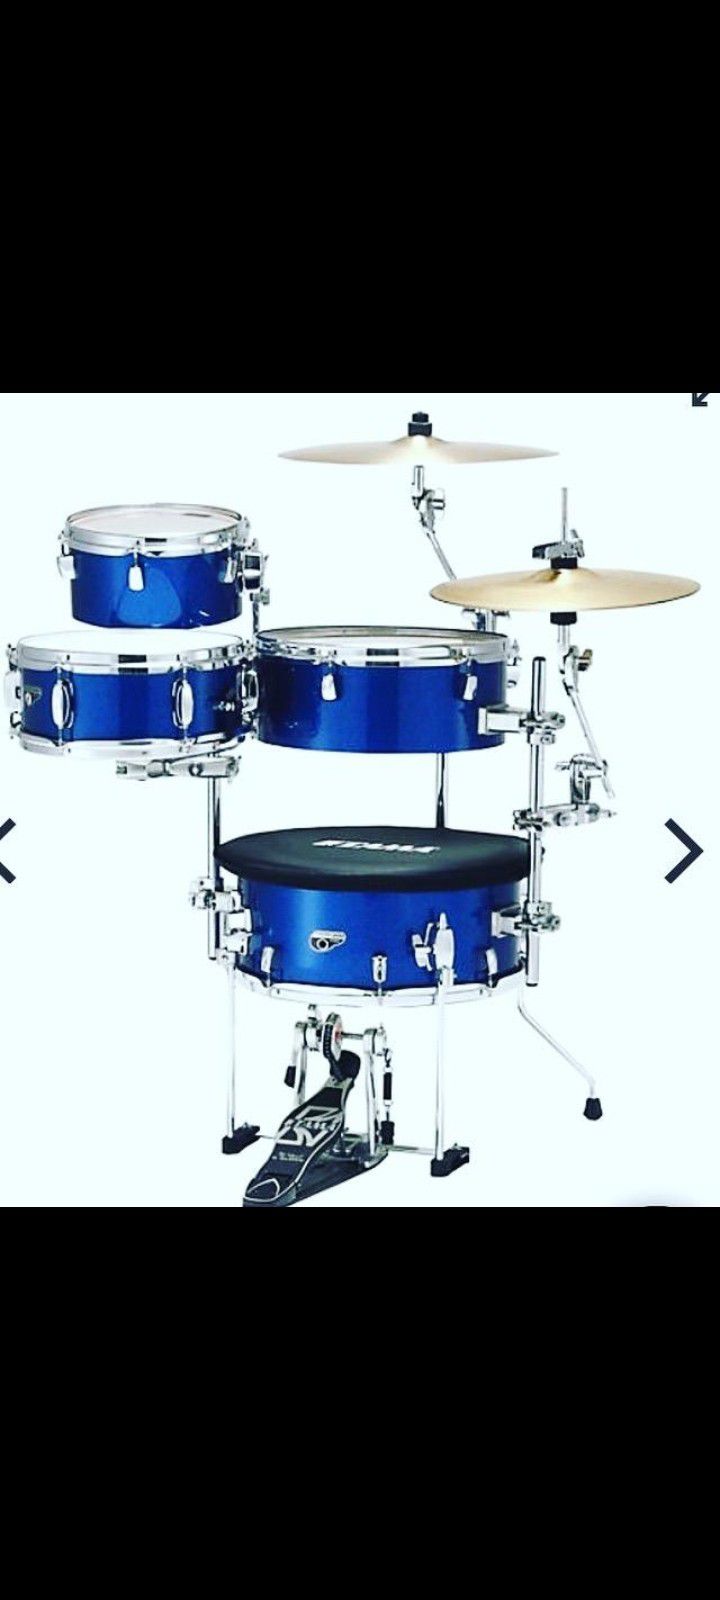 Tama Cocktail Jam CJB46 4- piece shell pack with snare drum-blue (Cymbals Are Optional Look to Description)